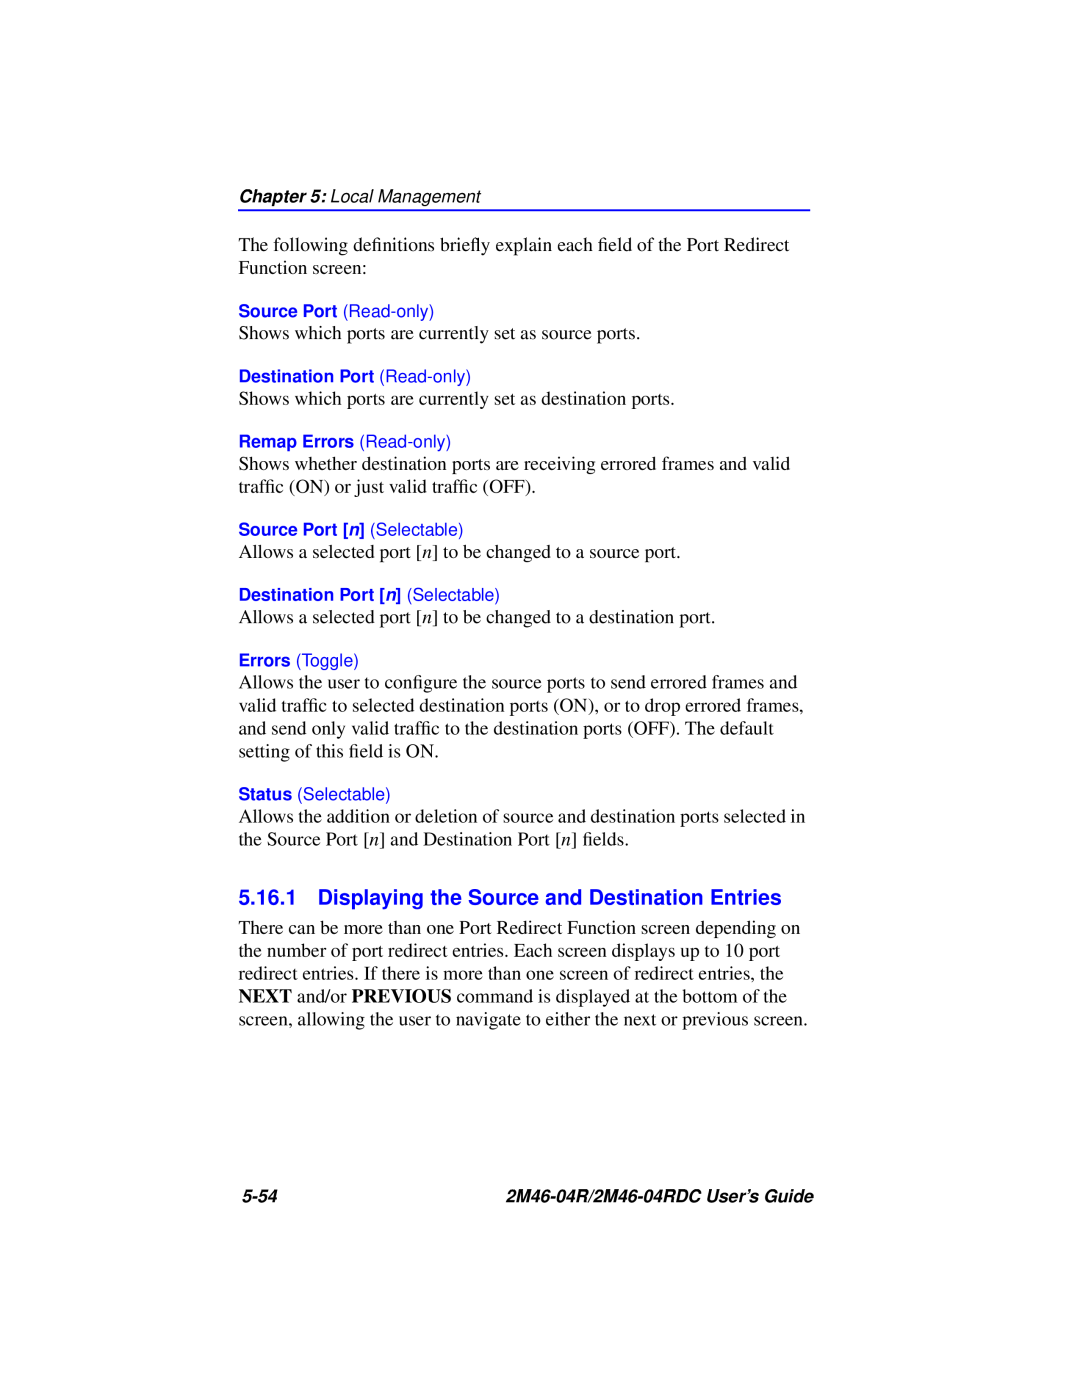 Cabletron Systems pmn manual Displaying the Source and Destination Entries 